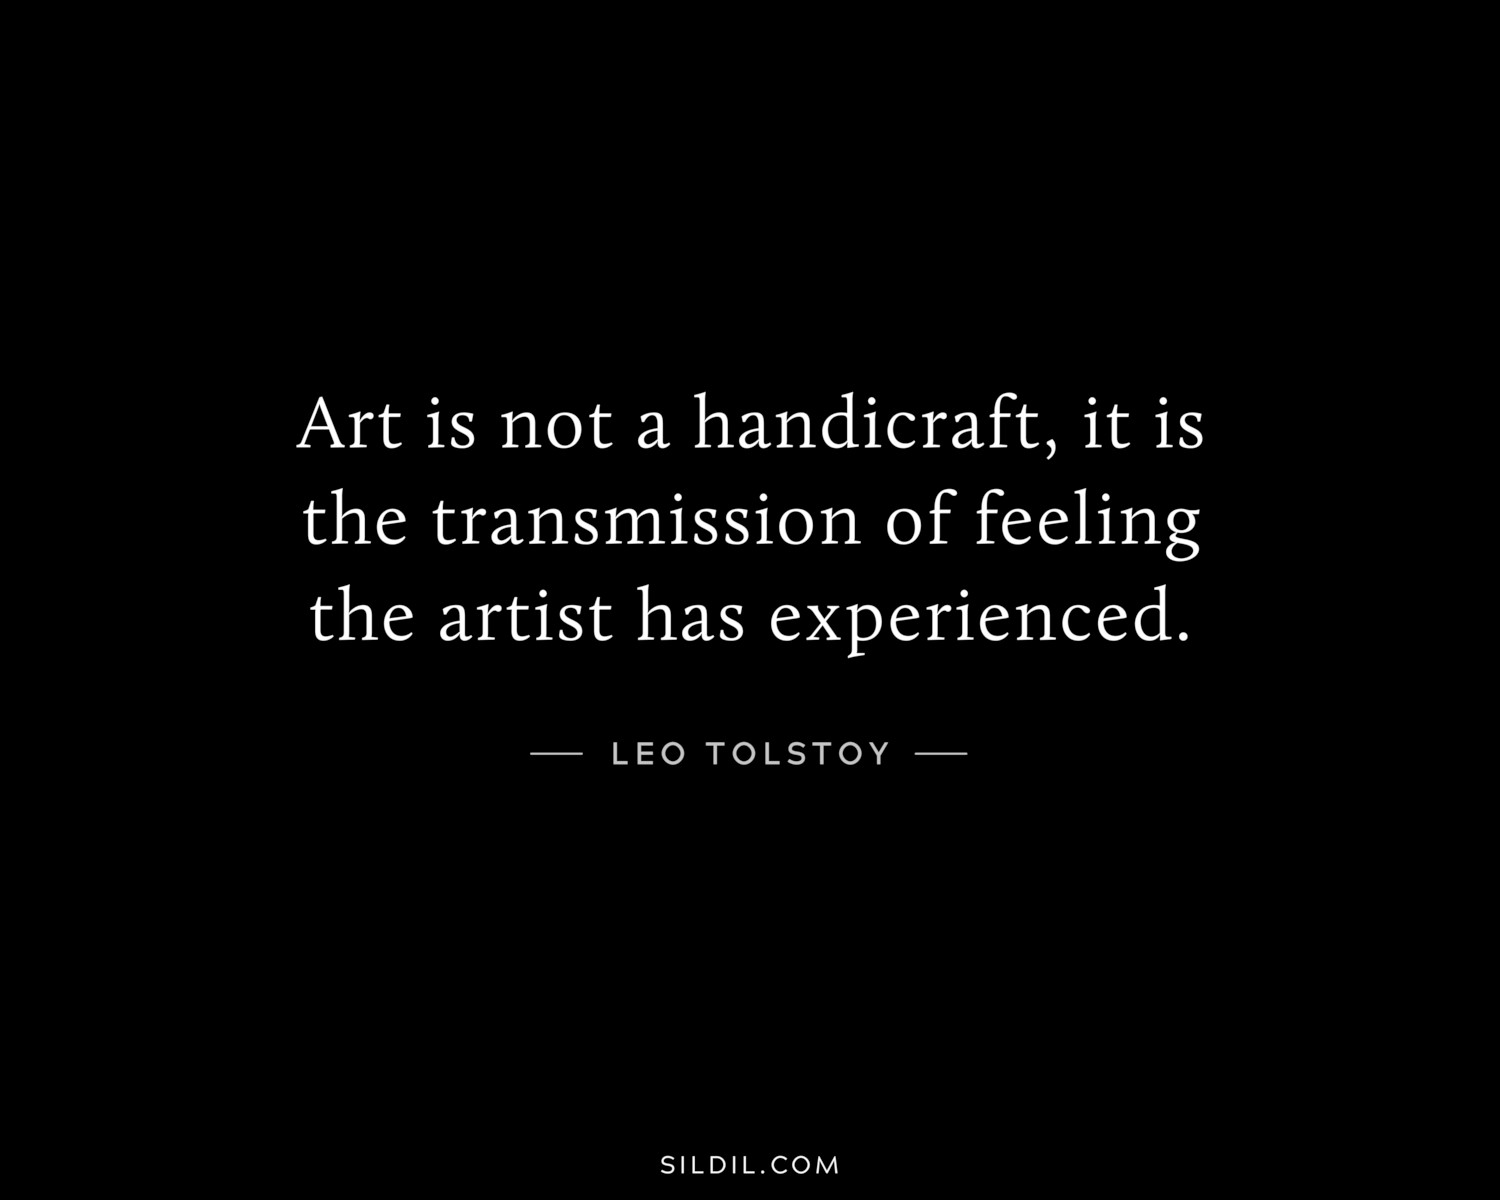 Art is not a handicraft, it is the transmission of feeling the artist has experienced.